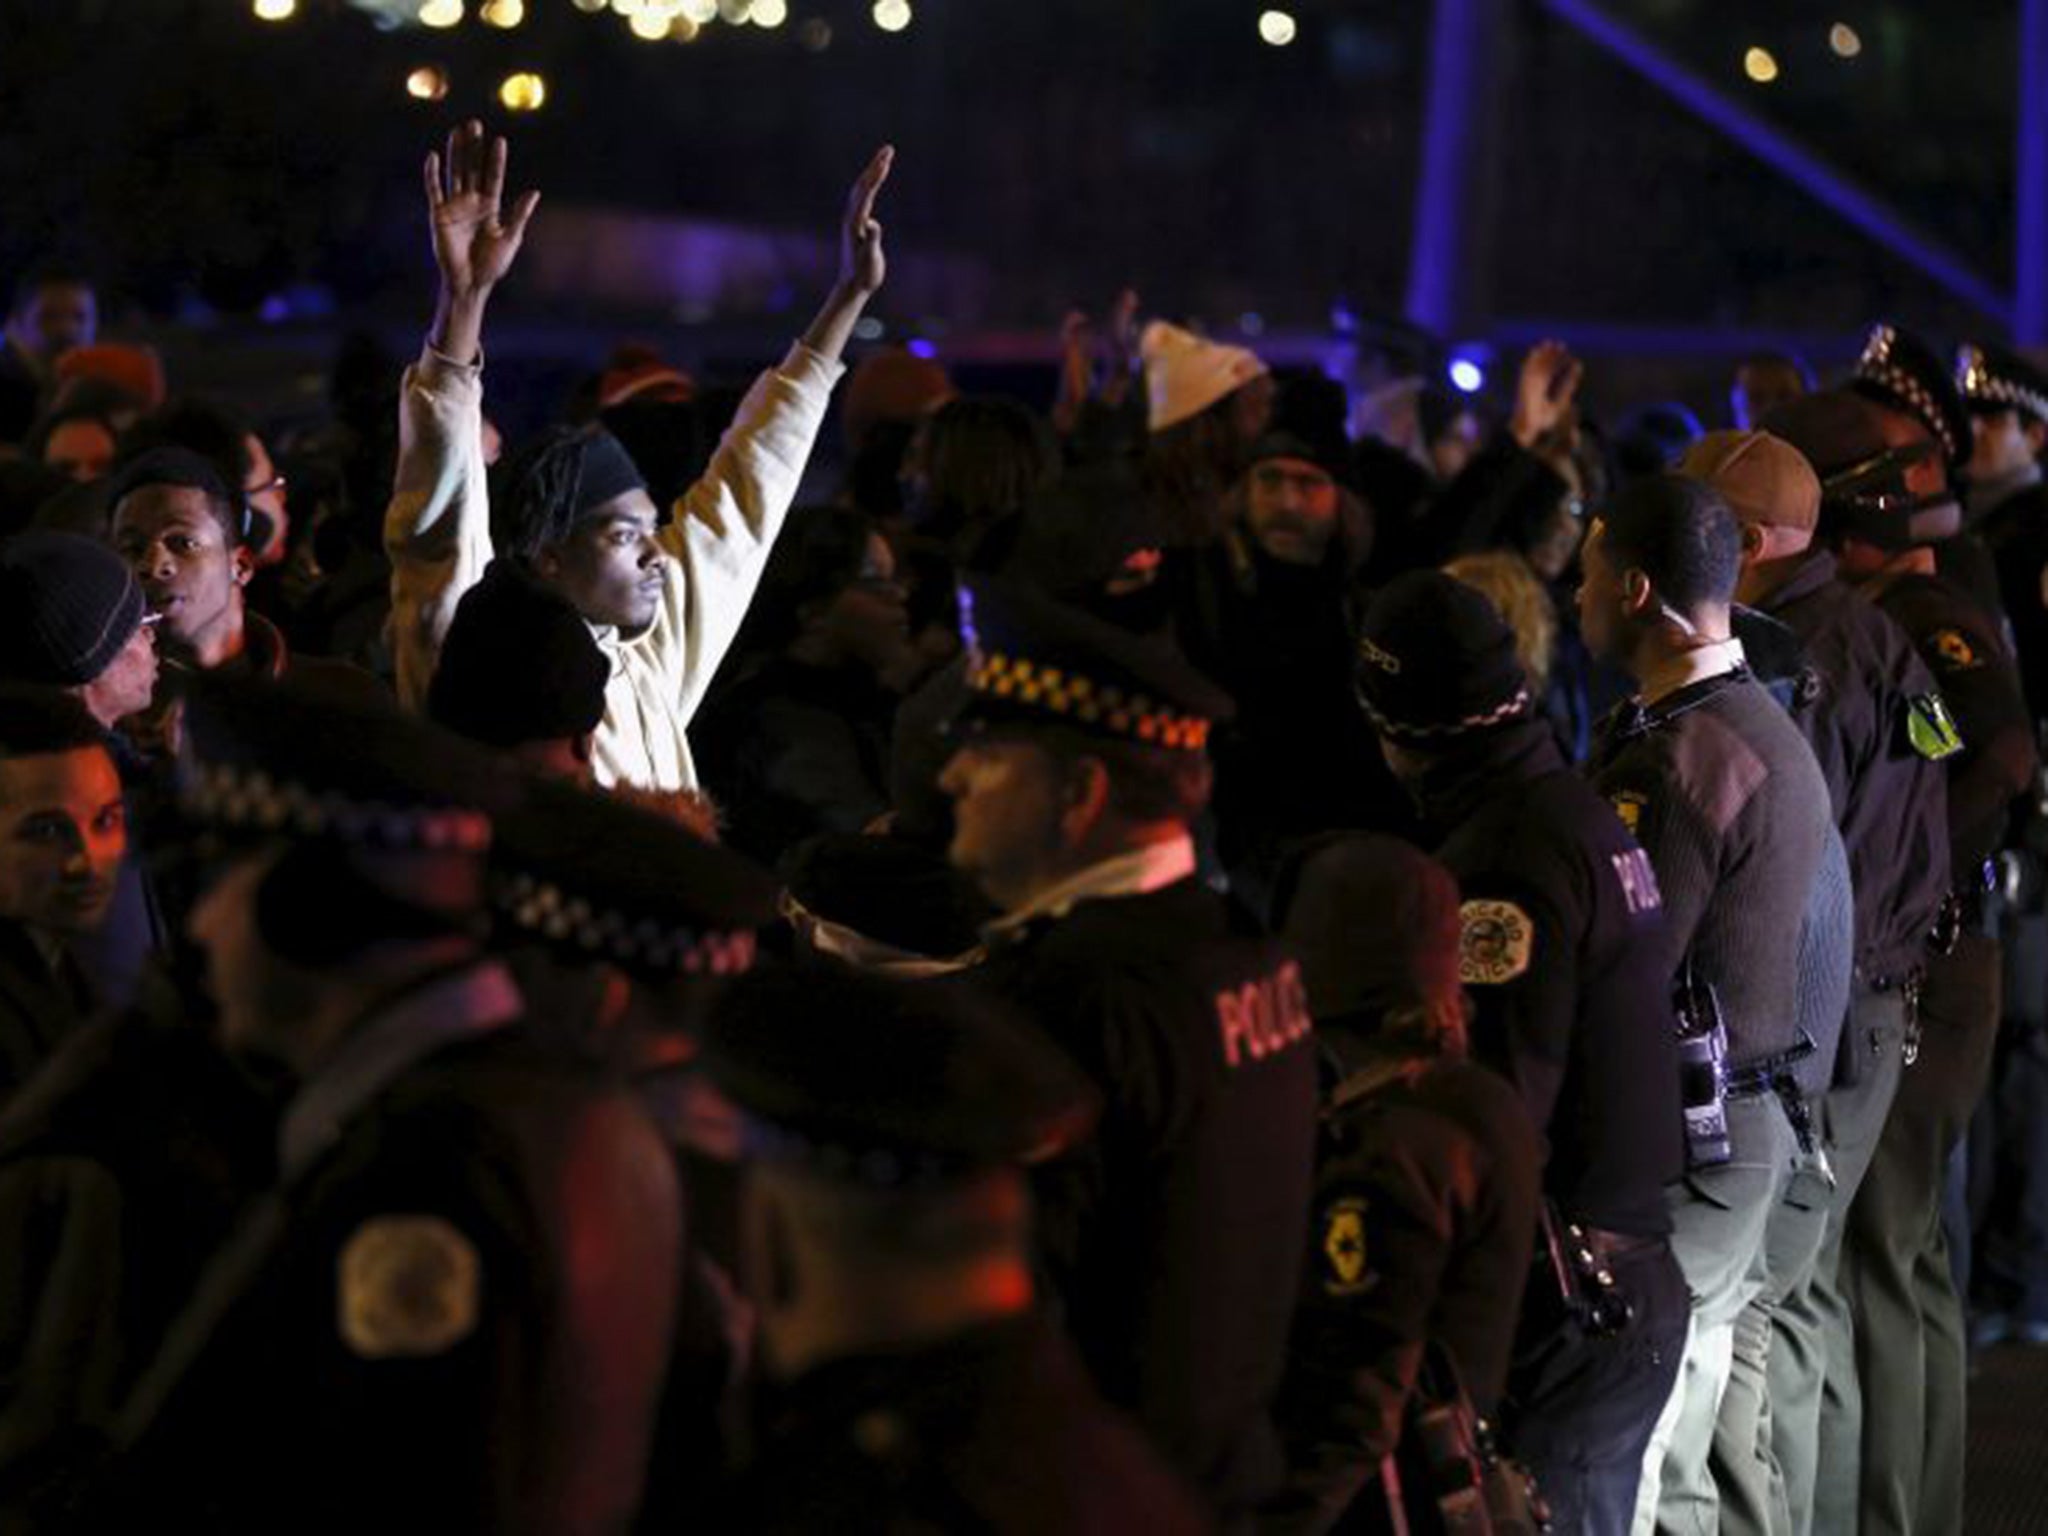 Protesters demonstrate after the release of a video showing the shooting of Laquan McDonald, in Chicago